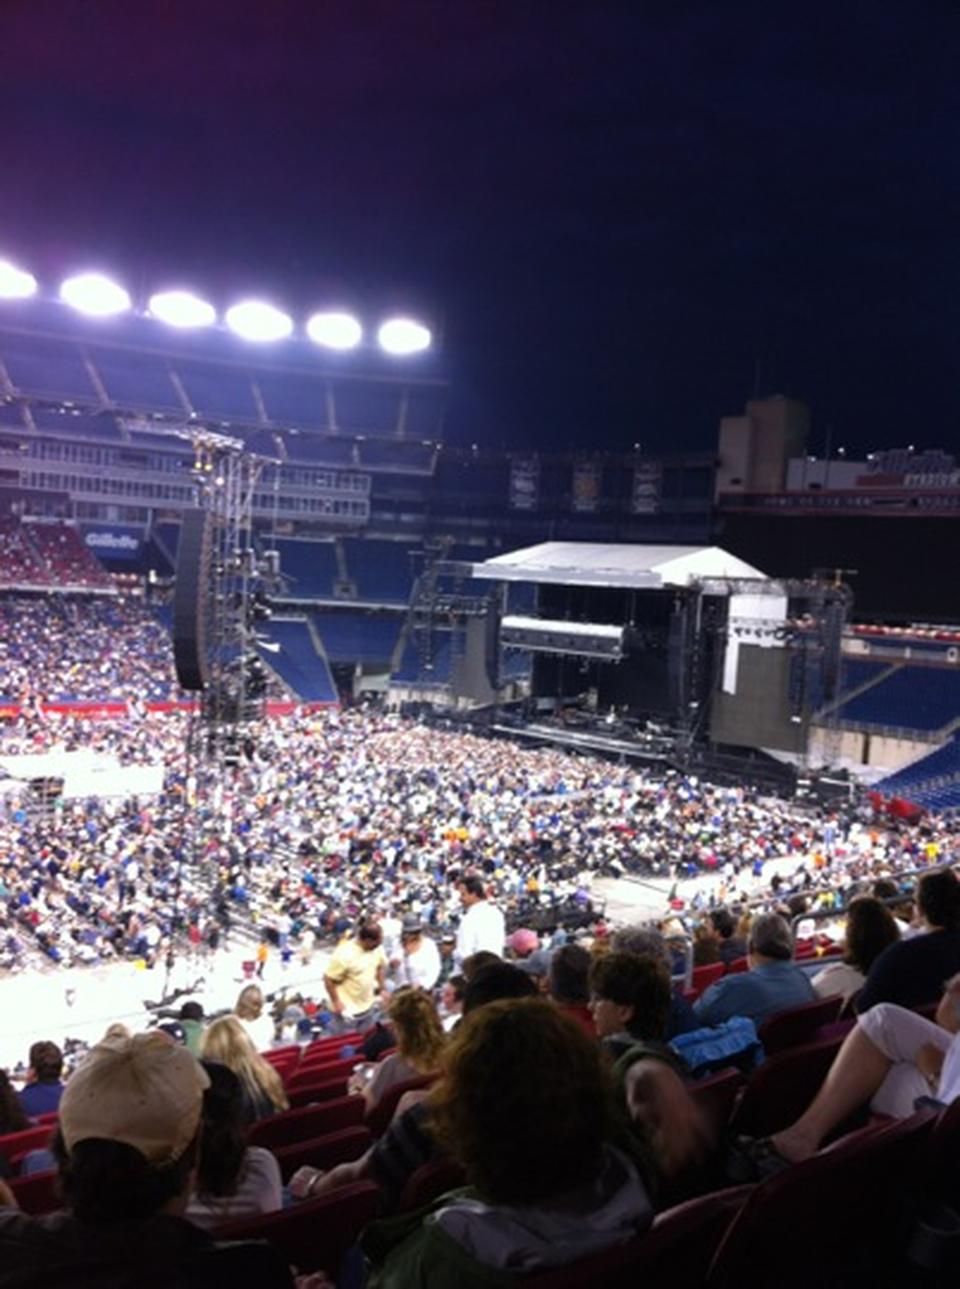 section cl31, row 11 seat view  for concert - gillette stadium